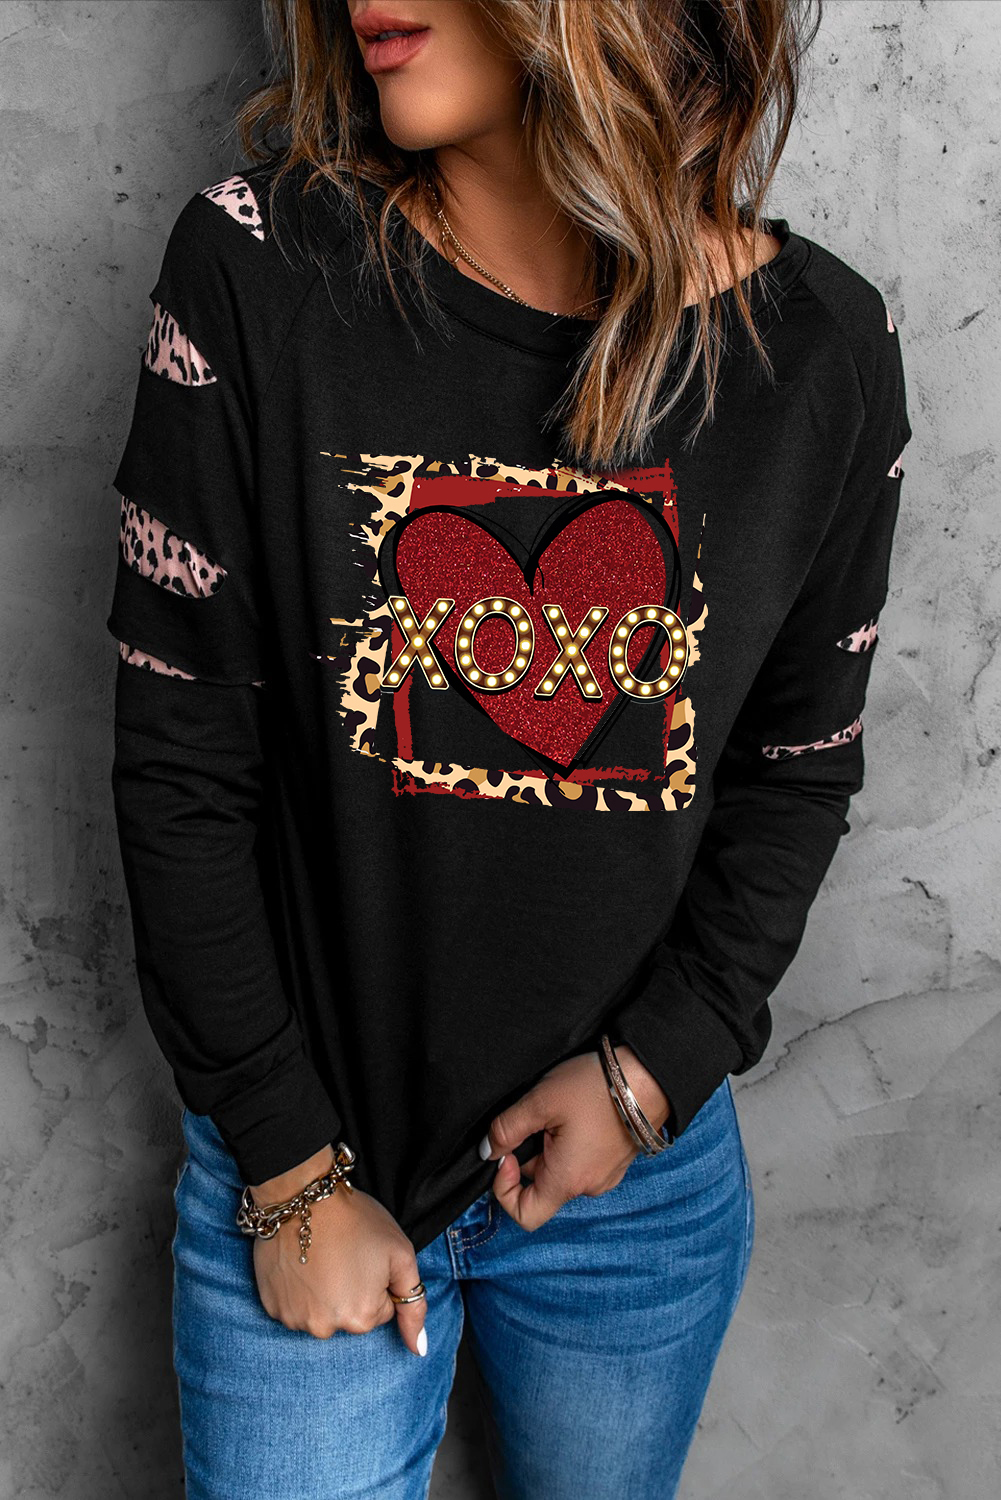 Wholesale Black XOXO Heart Shaped Cut Out Graphic Sweatshirt for VALENTINEs Day 